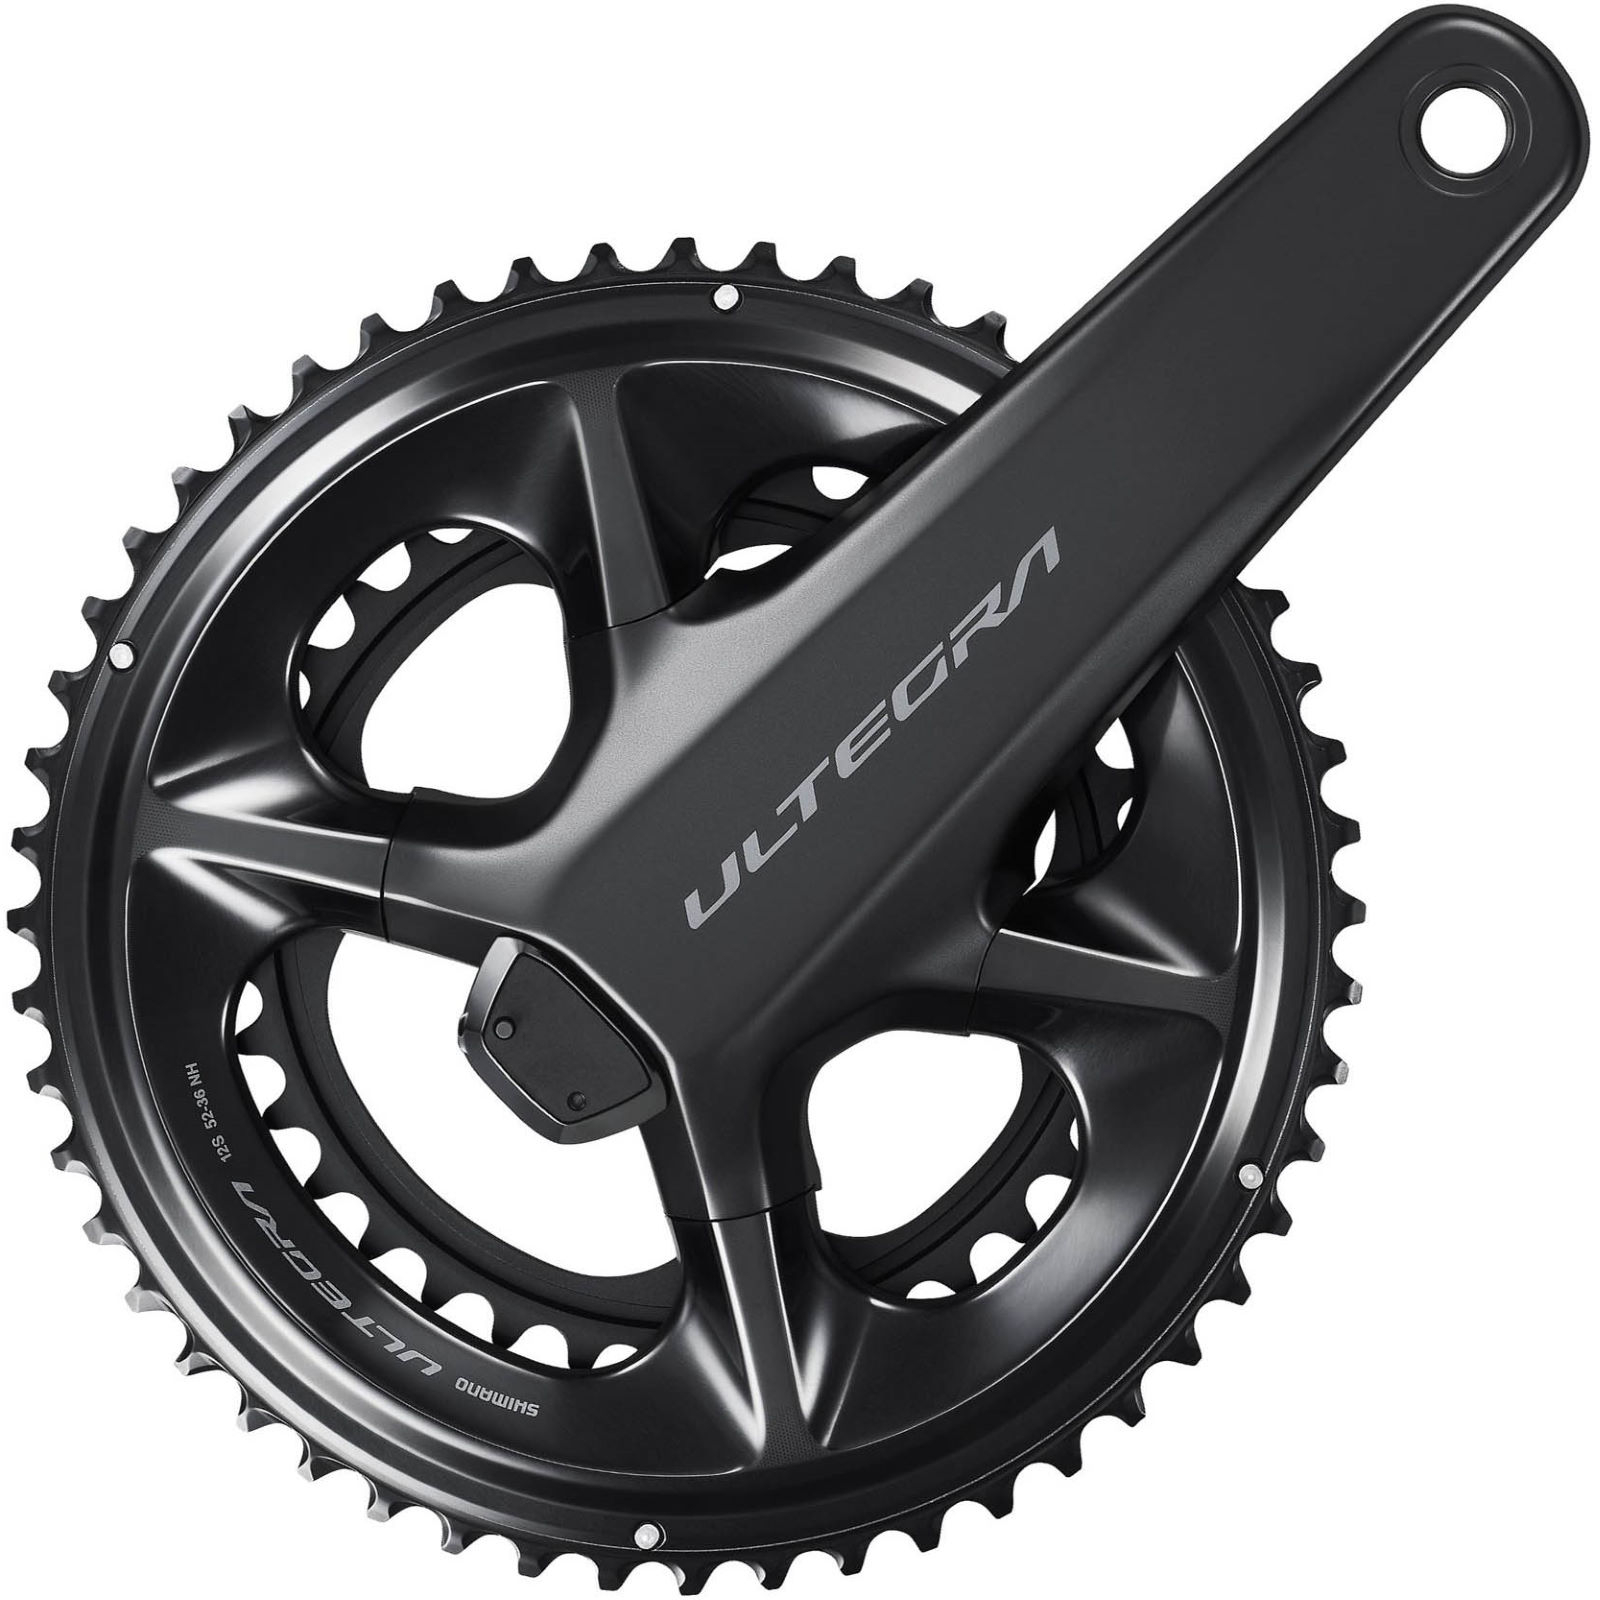 Shimano FC-R8100-P Ultegra 12-speed double Power Meter chainset 52